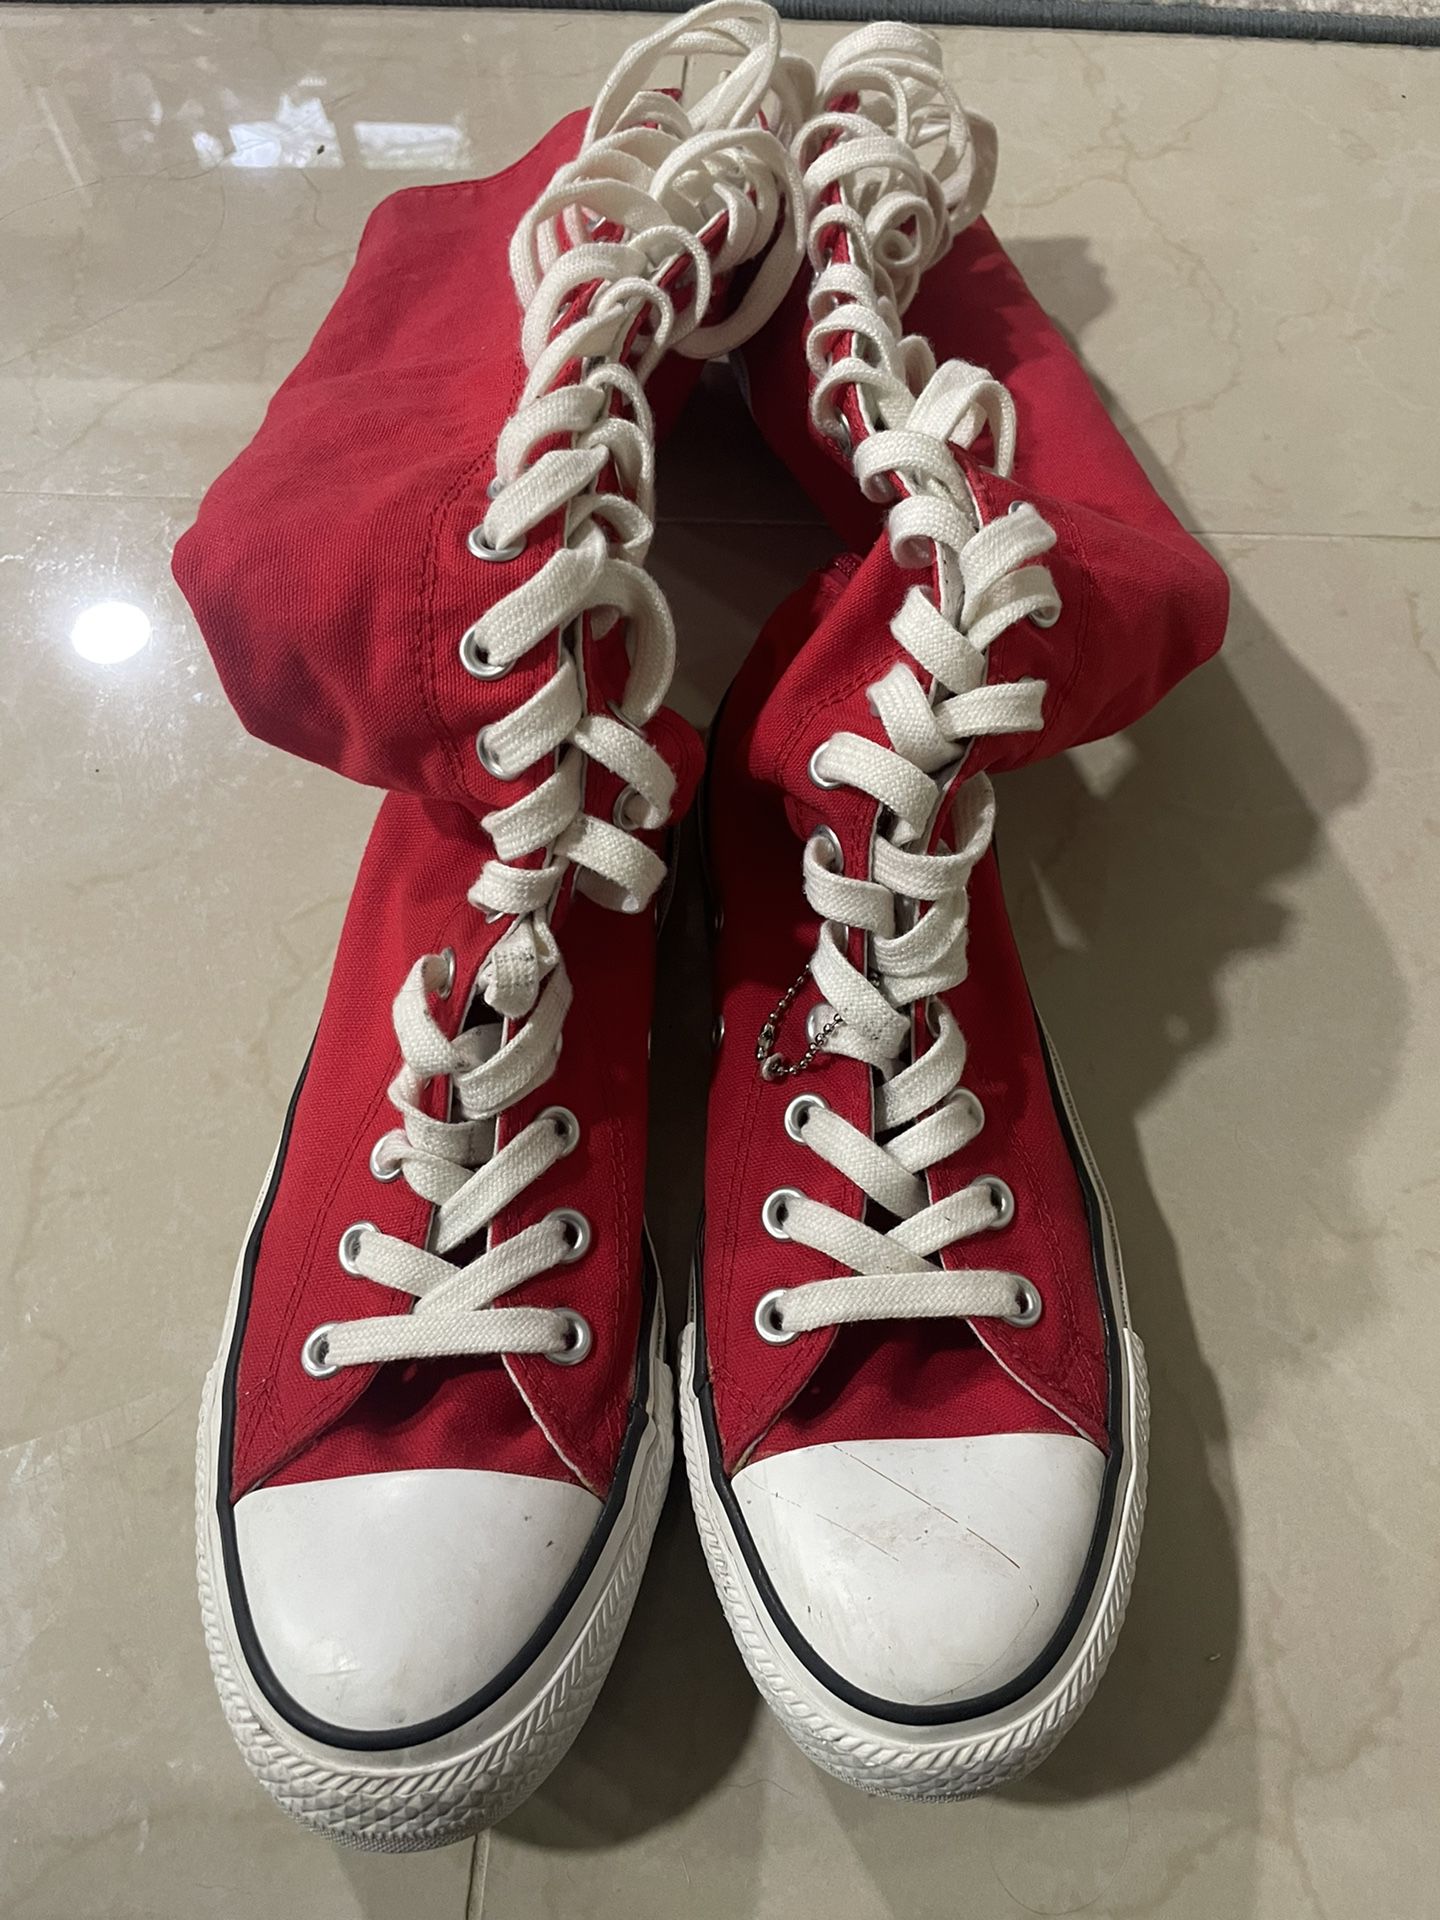 Monumentaal Het spijt me overschot Converse Knee High Lace Up Red & White Sneakers Boots Mens Size 6,Women  Size 8 for Sale in Queens, NY - OfferUp